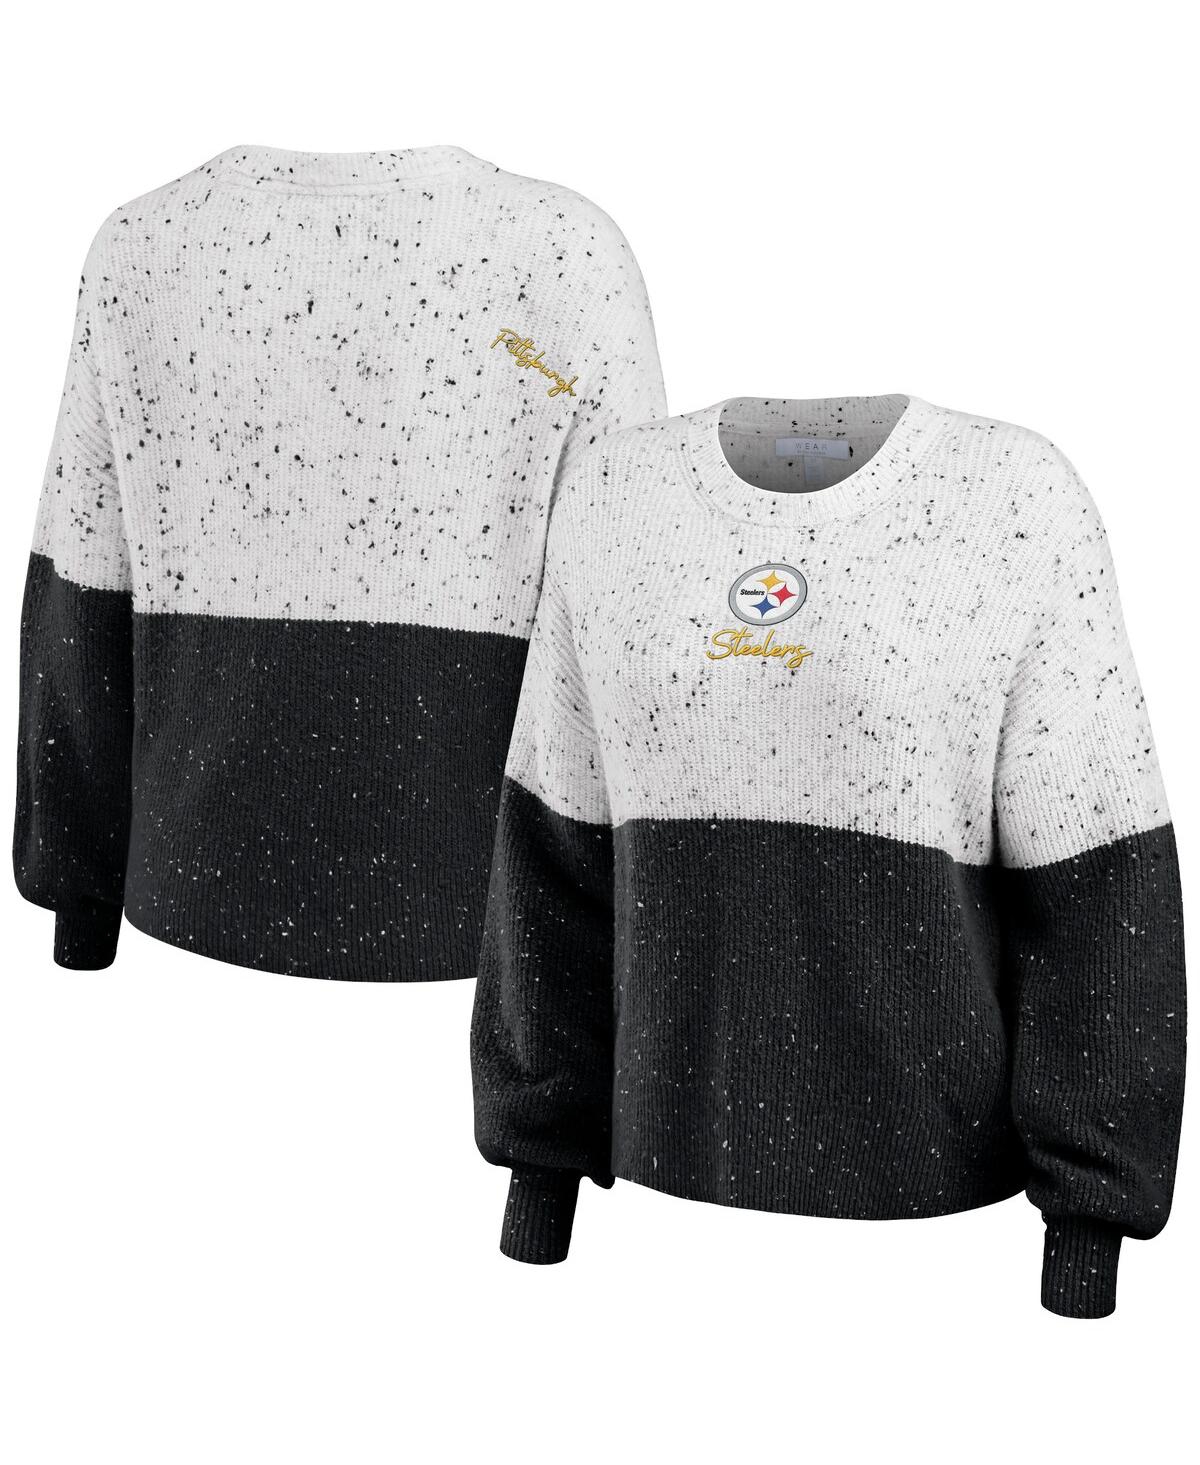 Women's Wear by Erin Andrews White, Black Pittsburgh Steelers Lighweight Modest Crop Color-Block Pullover Sweater - White, Black